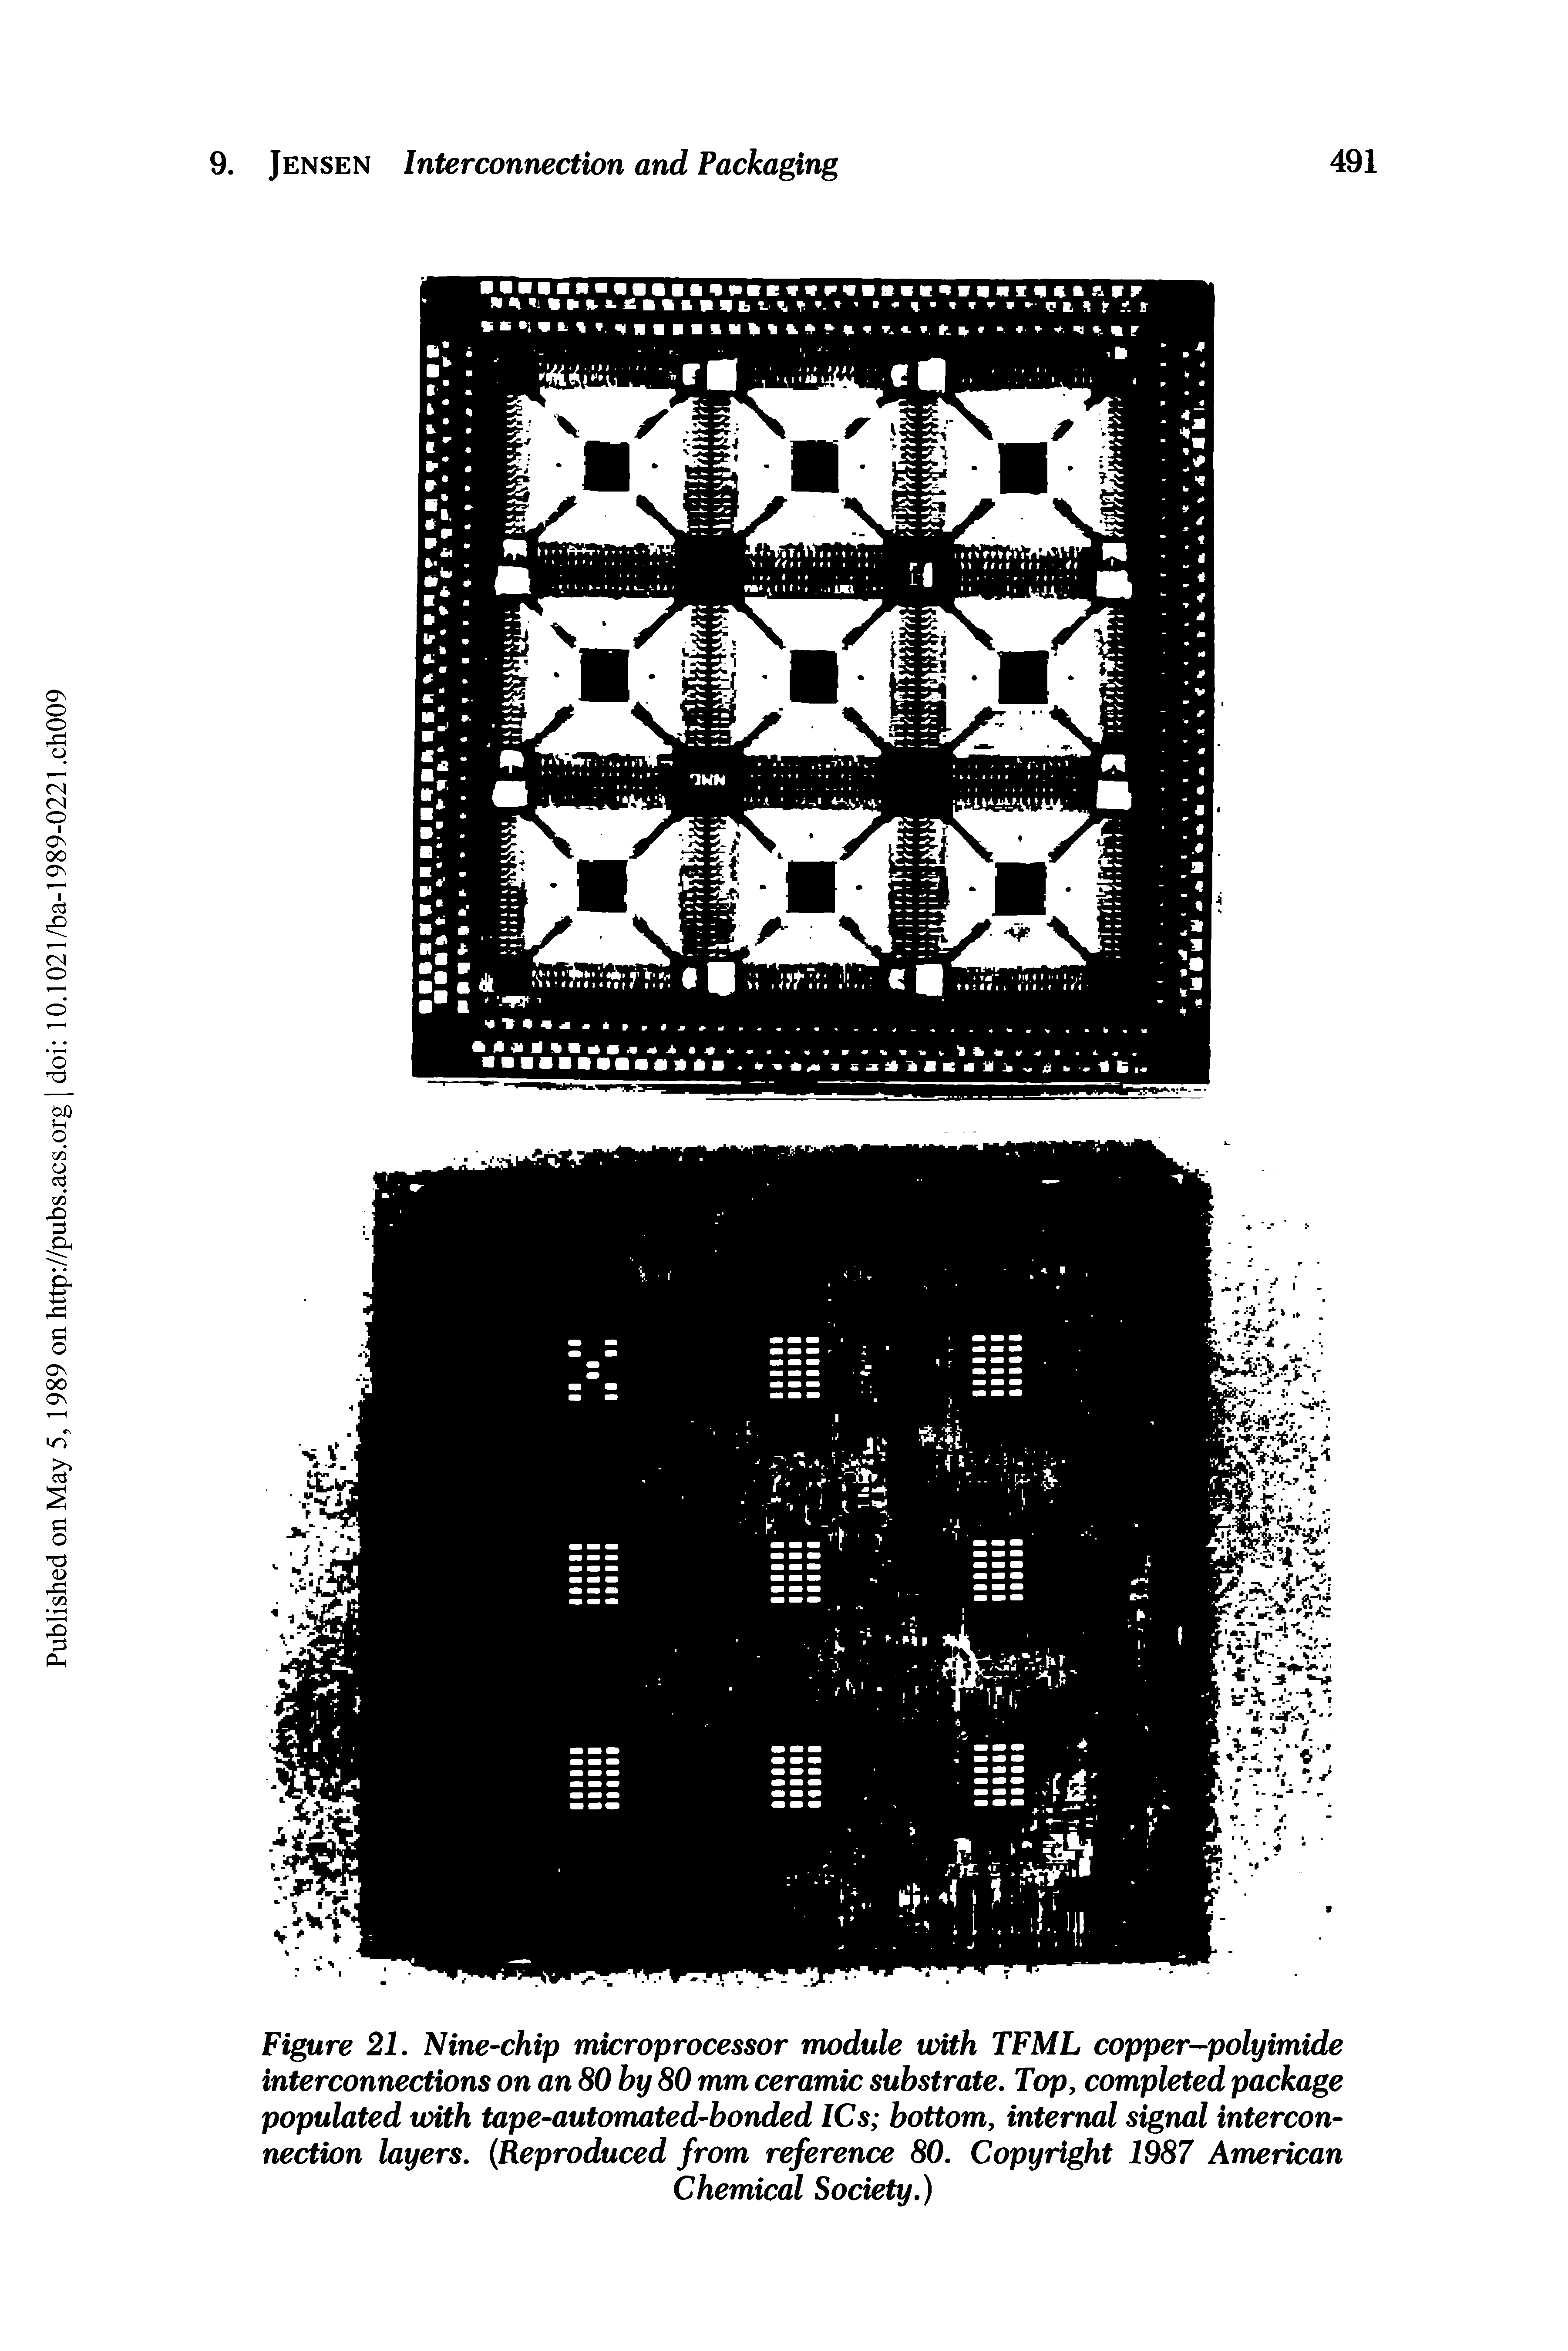 Figure 21. Nine-chip microprocessor module with TFML copper-polyimide interconnections on an 80 by 80 mm ceramic substrate. Top, completed package populated with tape-automated-bonded lCs bottom, internal signal interconnection layers. (Reproduced from reference 80. Copyright 1987 American...